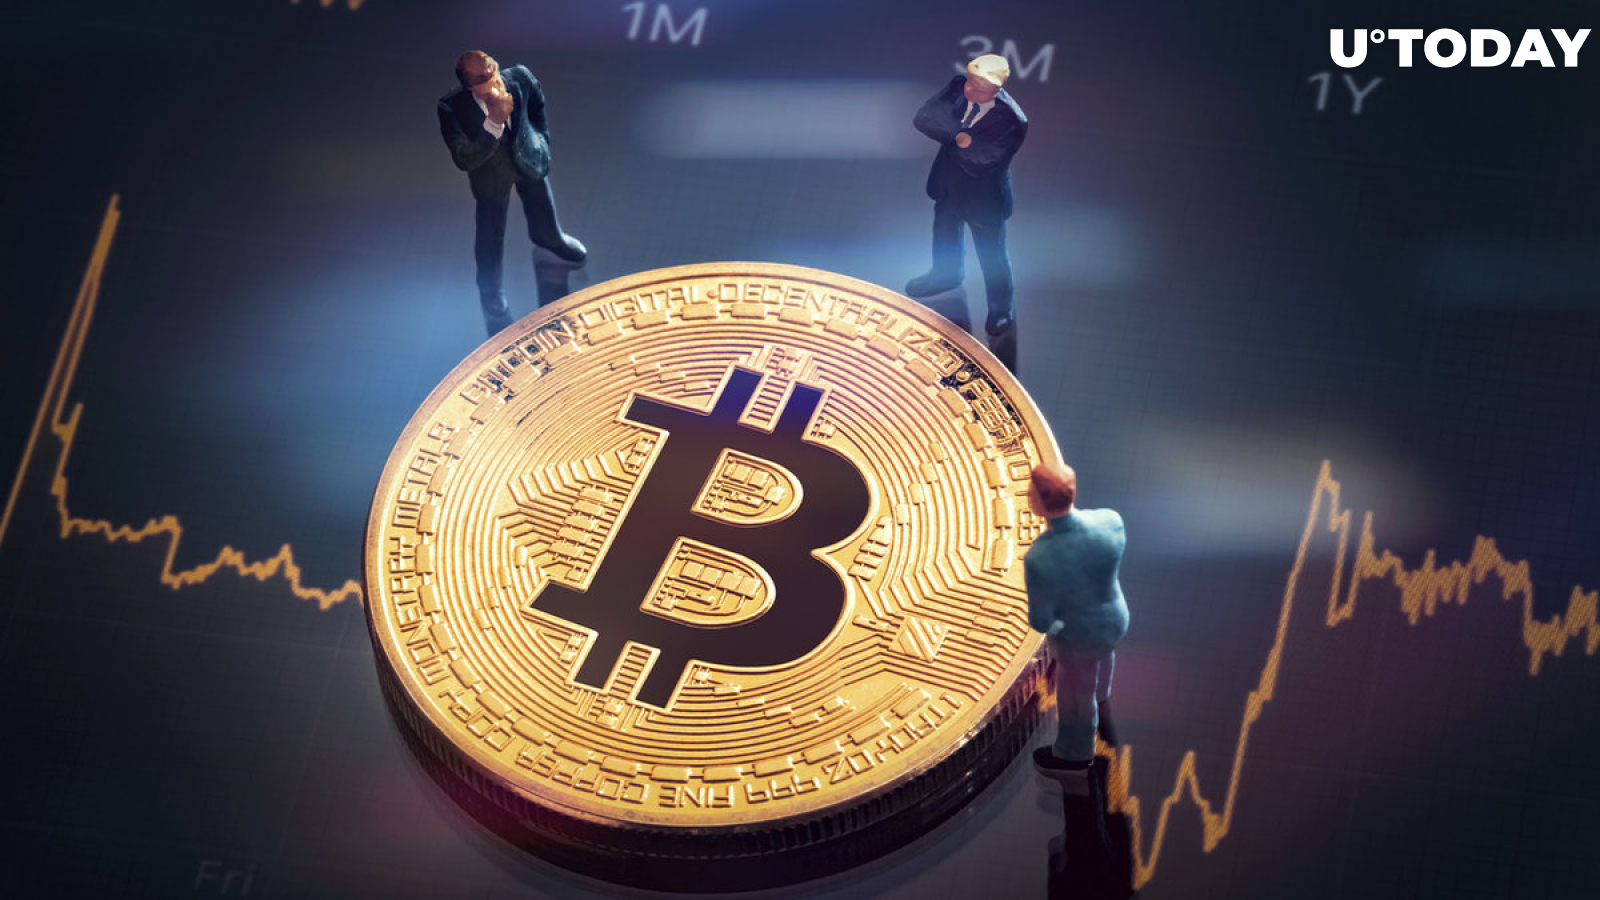 Bitcoin Miners Foresaw Current BTC Plunge, Analyst Says - Here's What Happened